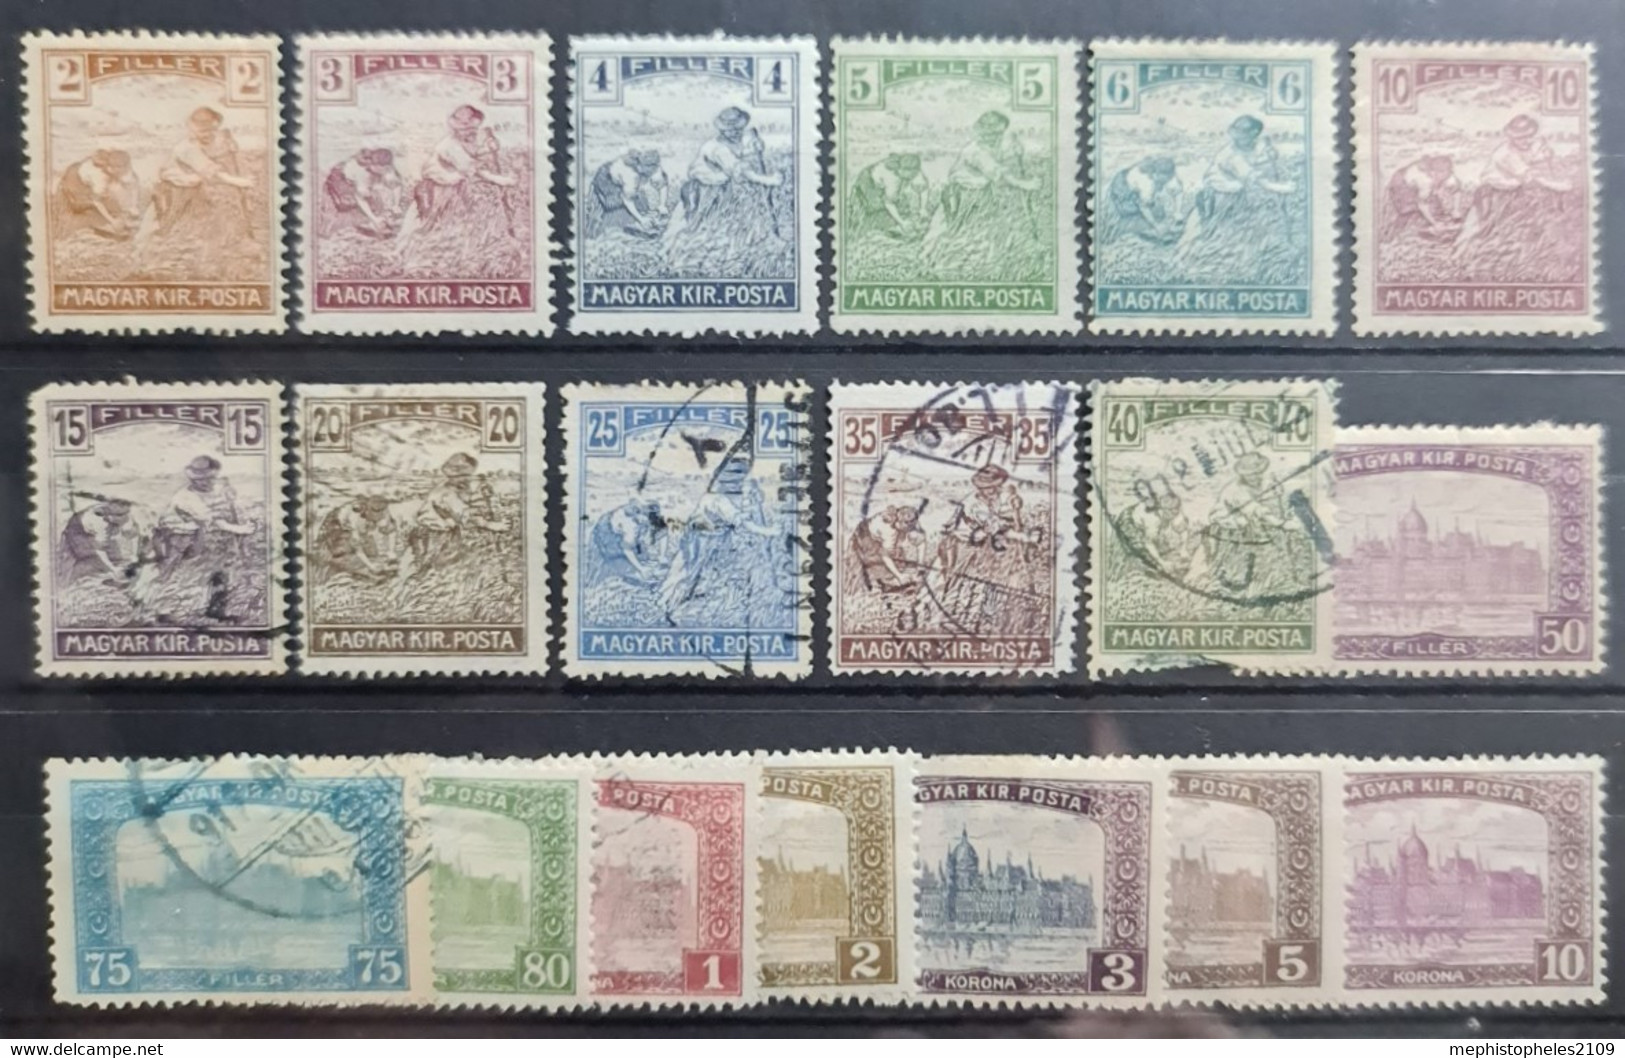 HUNGARY 1916-18 - MLH/canceled - Sc# 108-126 - Complete Set! - Used Stamps